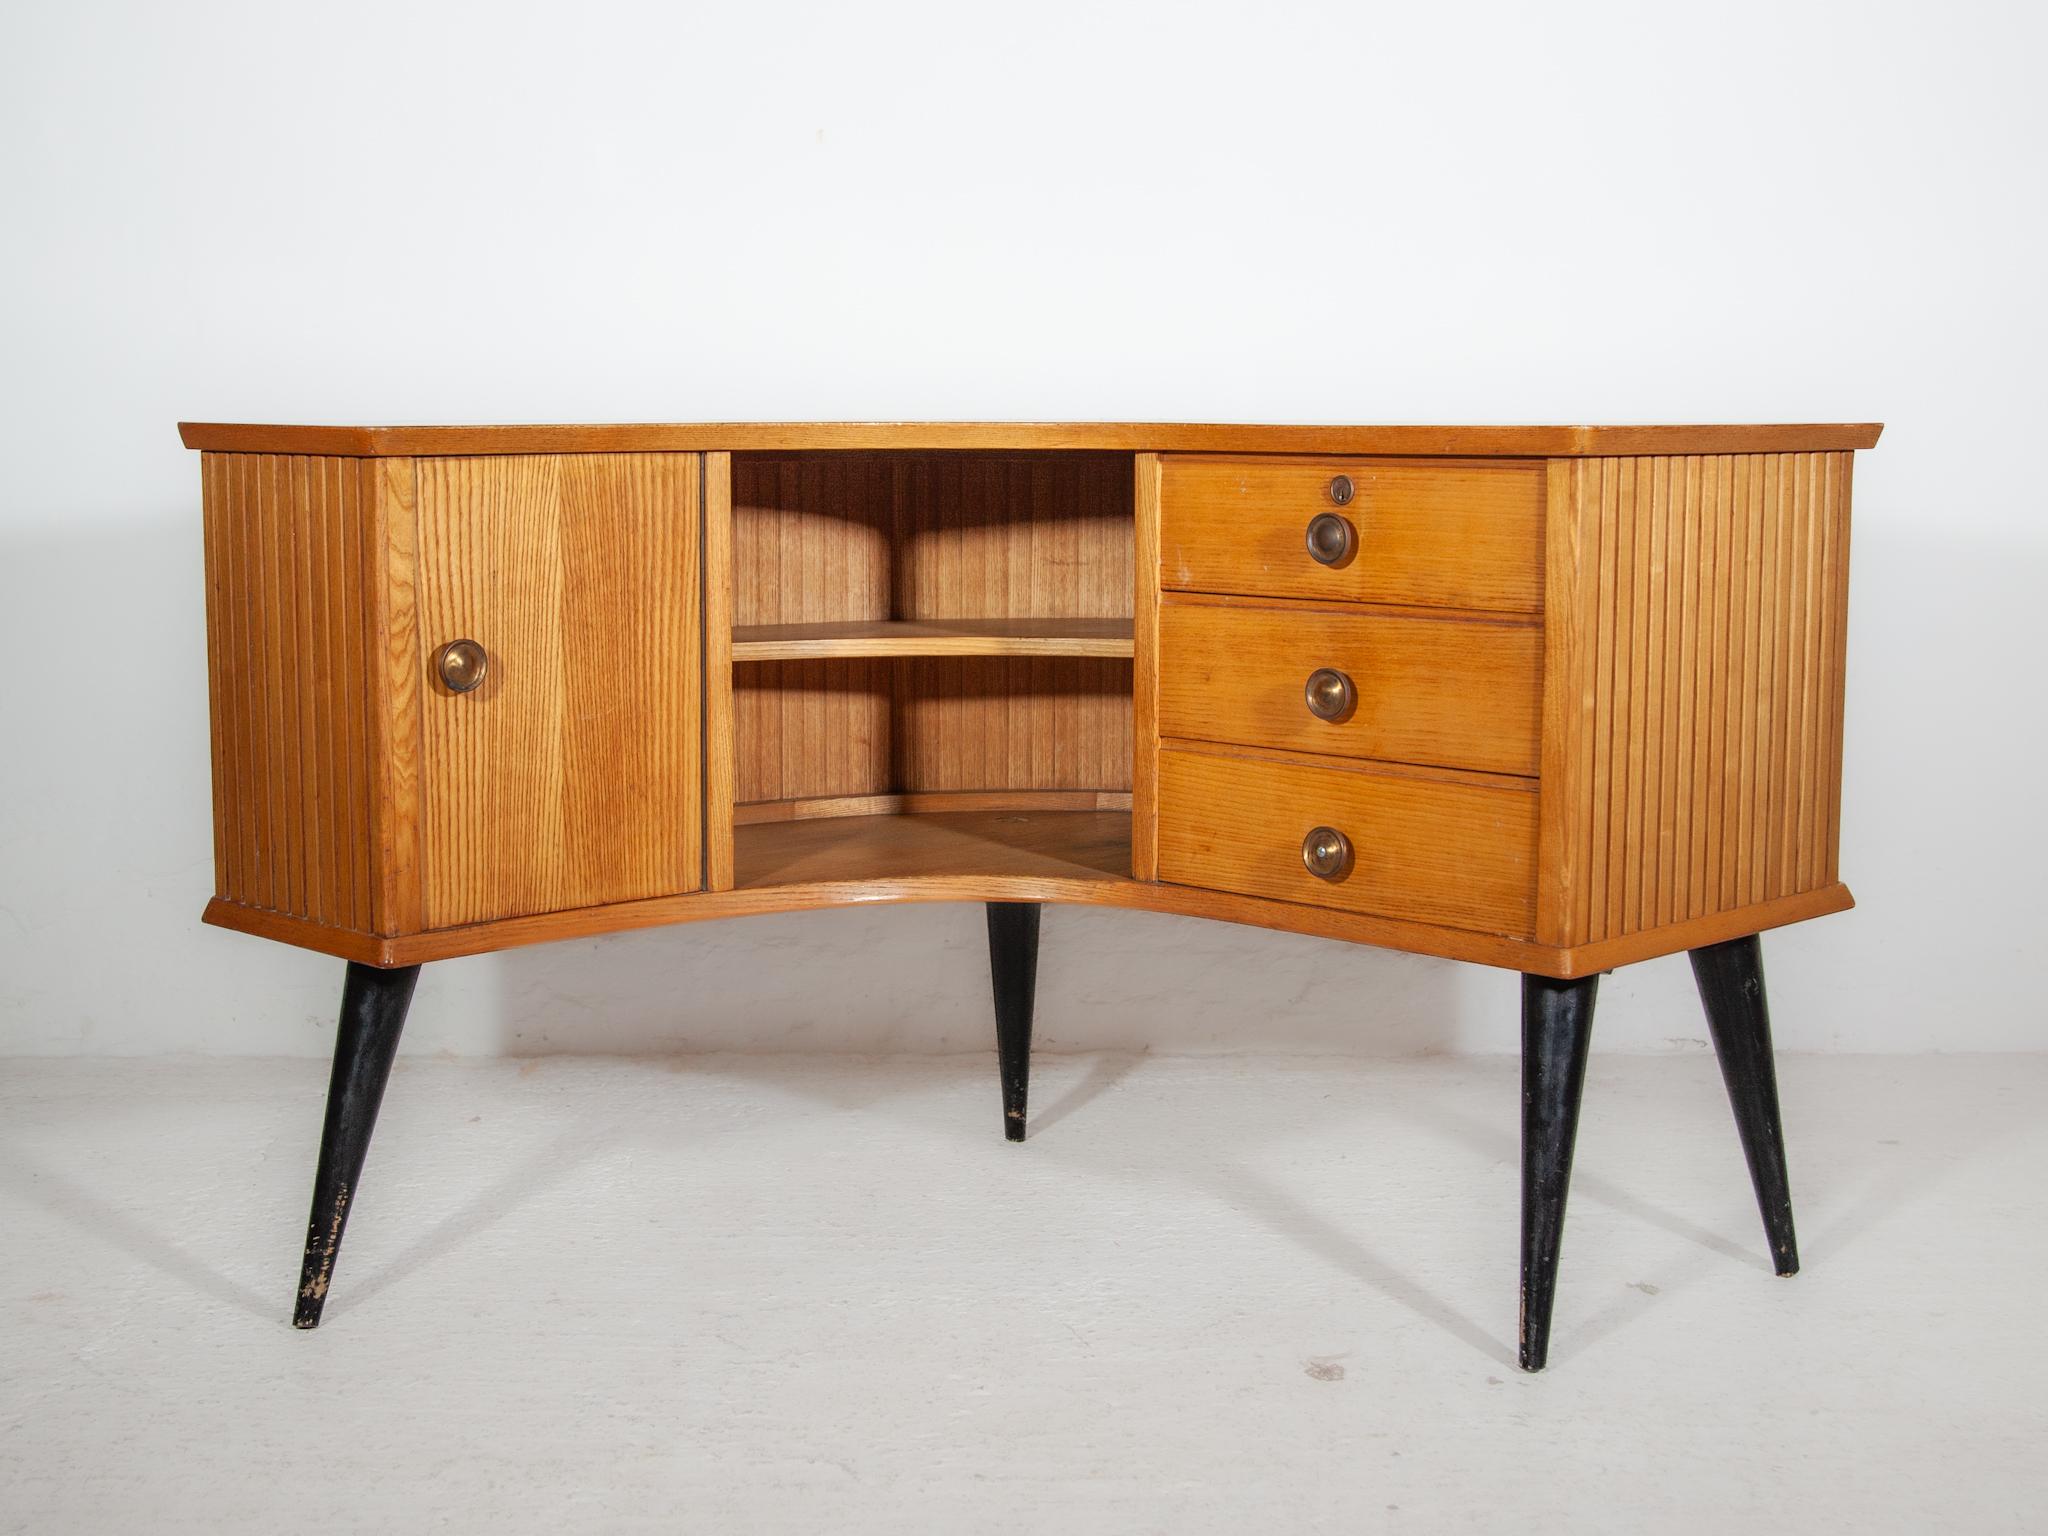 Belgian Boomerang Shaped Desk, Shop Counter, 1950s by Alfred Hendrickx For Sale